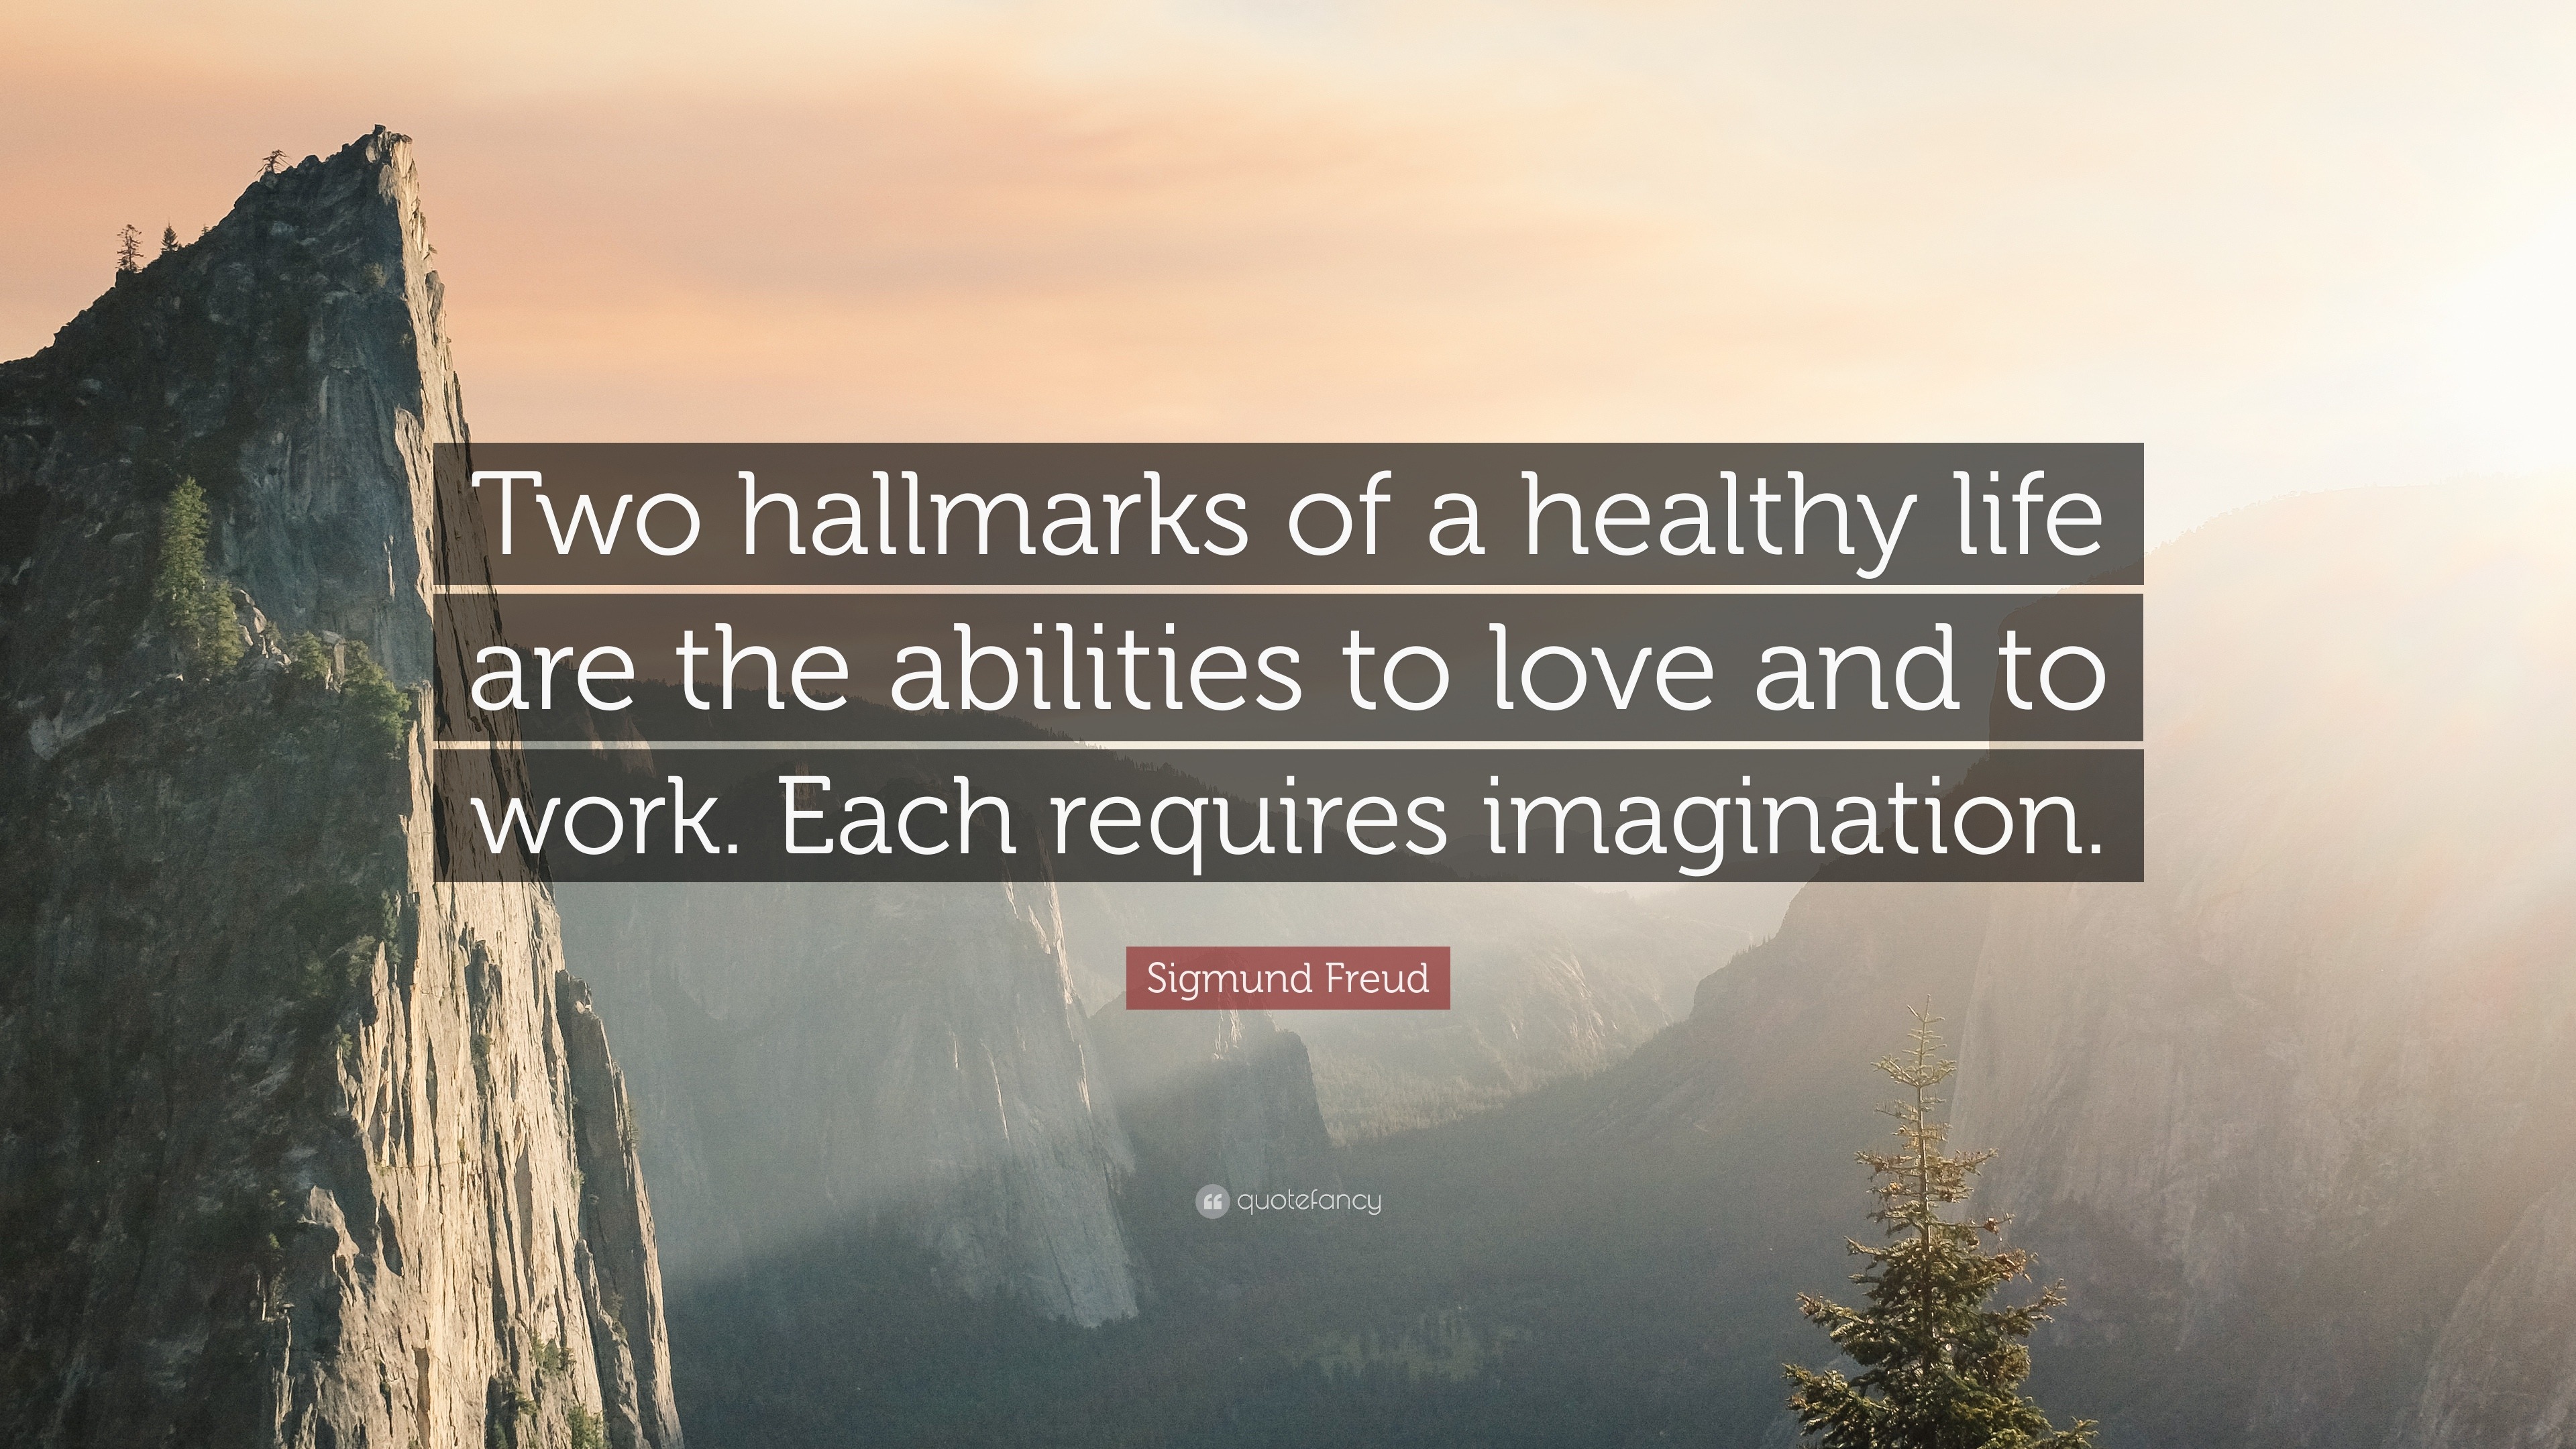 Sigmund Freud Quote: “Two hallmarks of a healthy life are the abilities